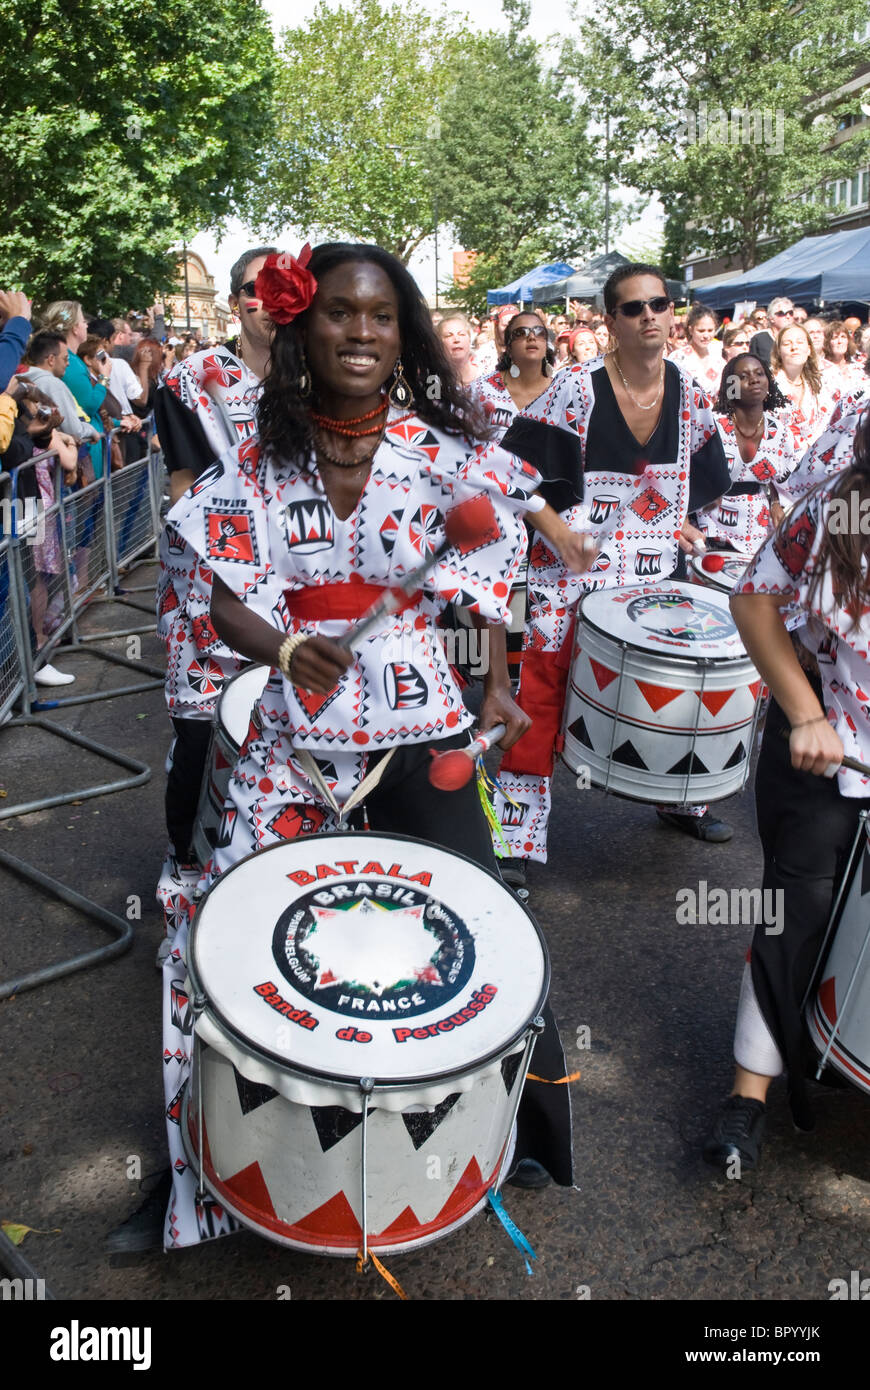 Drummers from Batala Banda de Percussao performing at the Notting Hill Carnival street parade in West London, England. Stock Photo